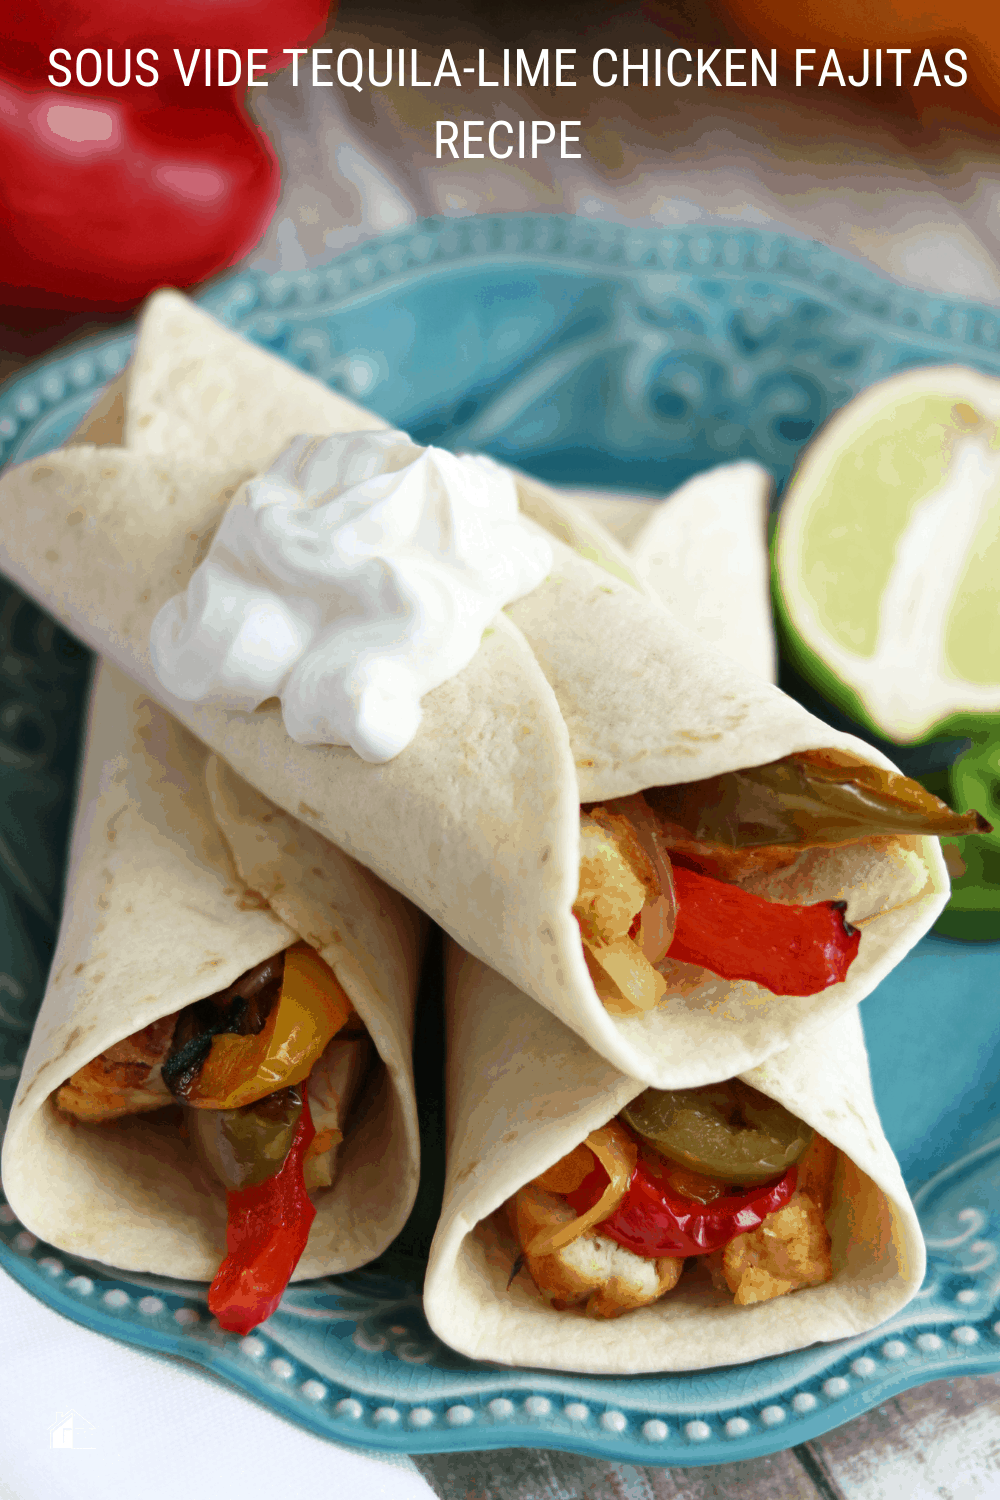 Try this sous vide tequila lime chicken fajita recipe. Cooking is like working magic, especially when you have the ability to use techniques once reserved for the pros. via @mystayathome